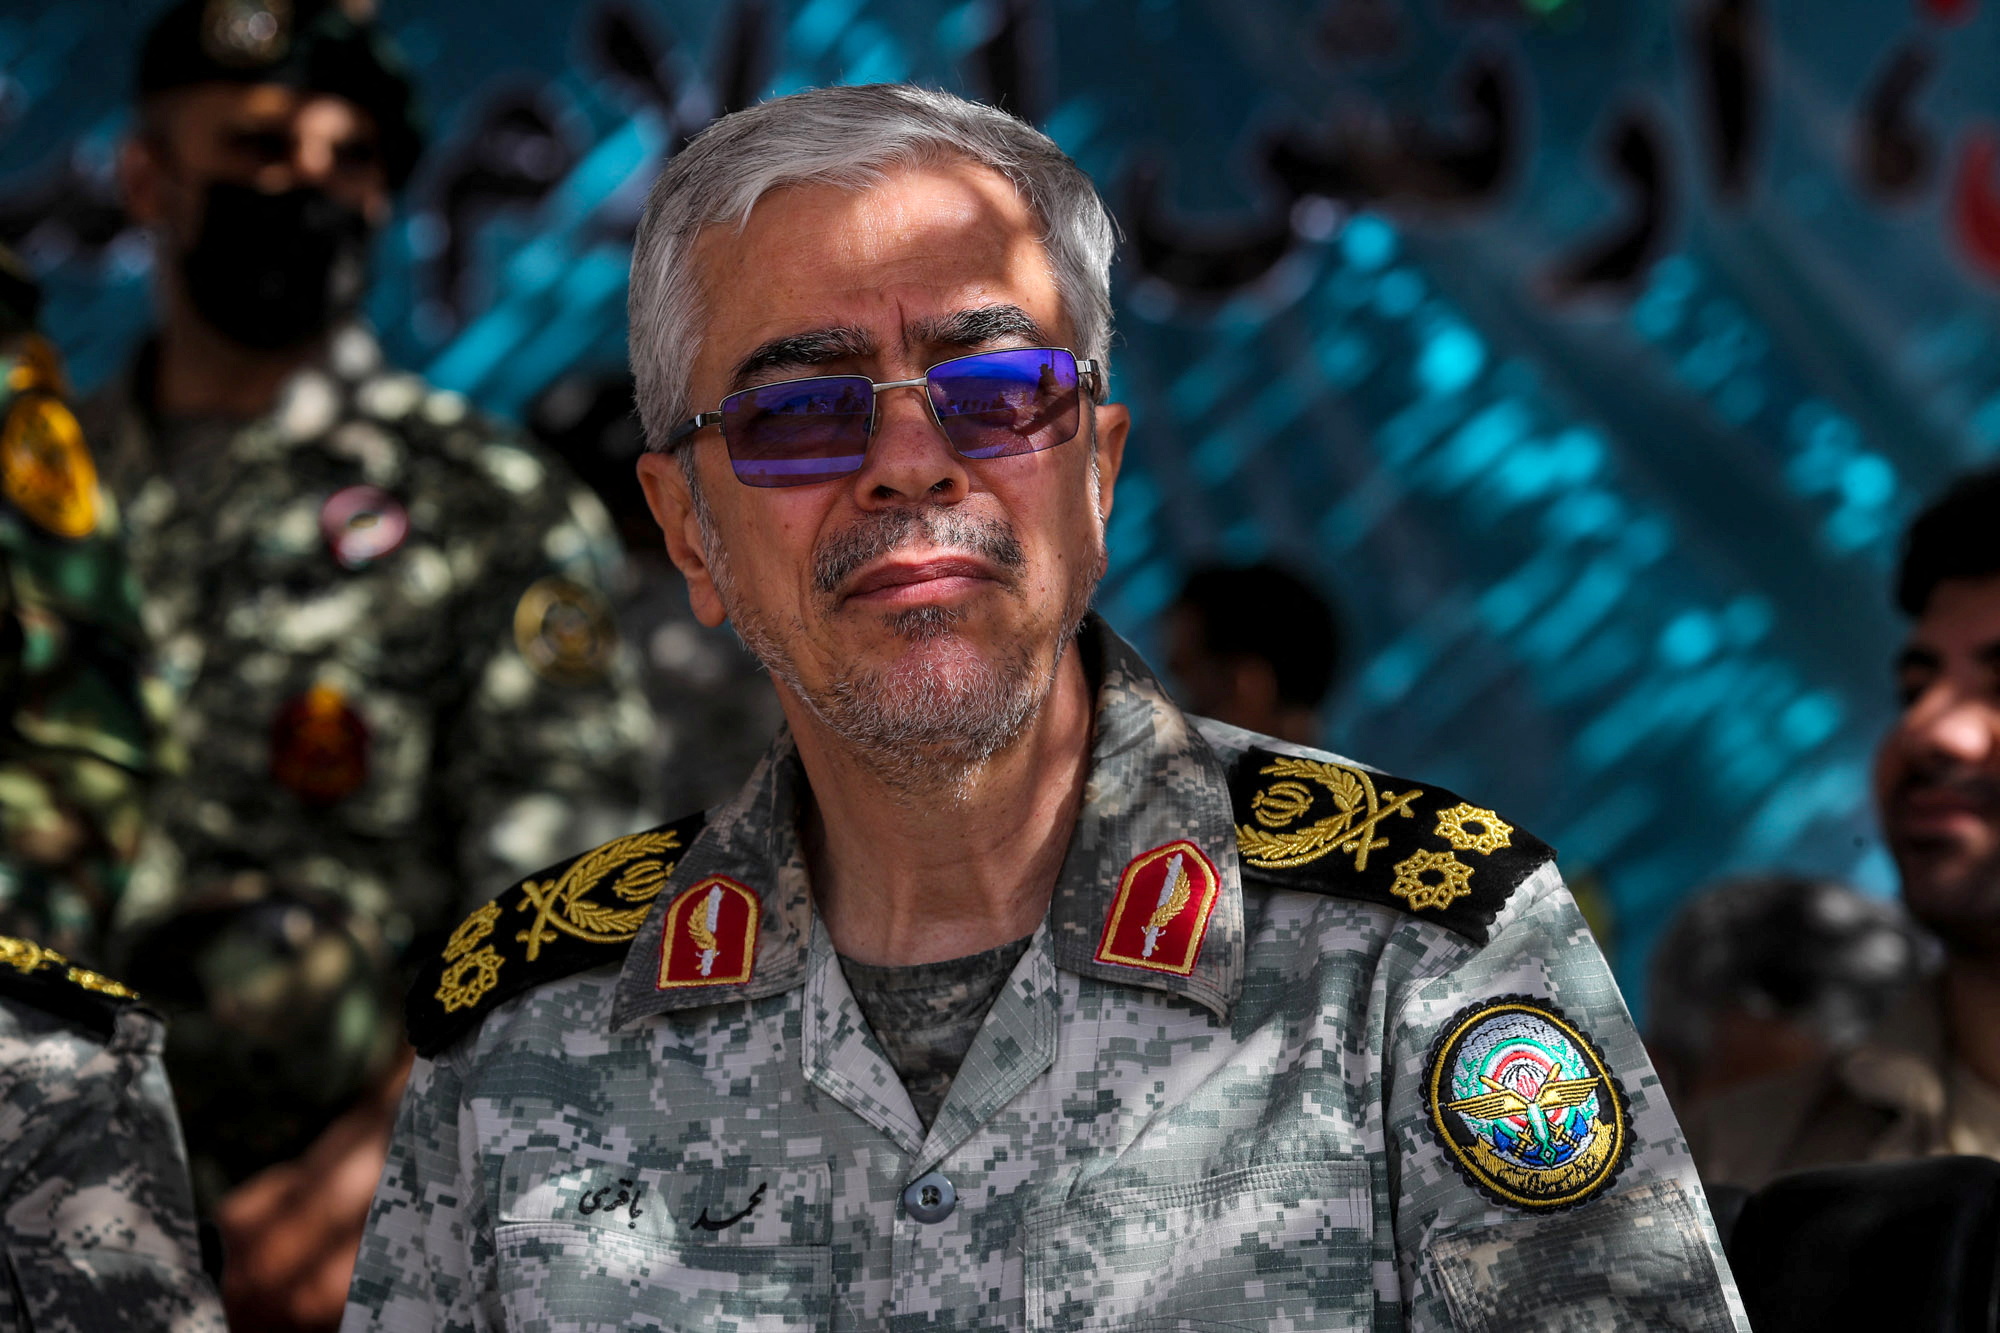 Iranian Armed Forces Chief of Staff, Major General Mohammad Bagheri, looks on during a military exercise in Isfahan, Iran, in this handout image obtained on September 8, 2022. 